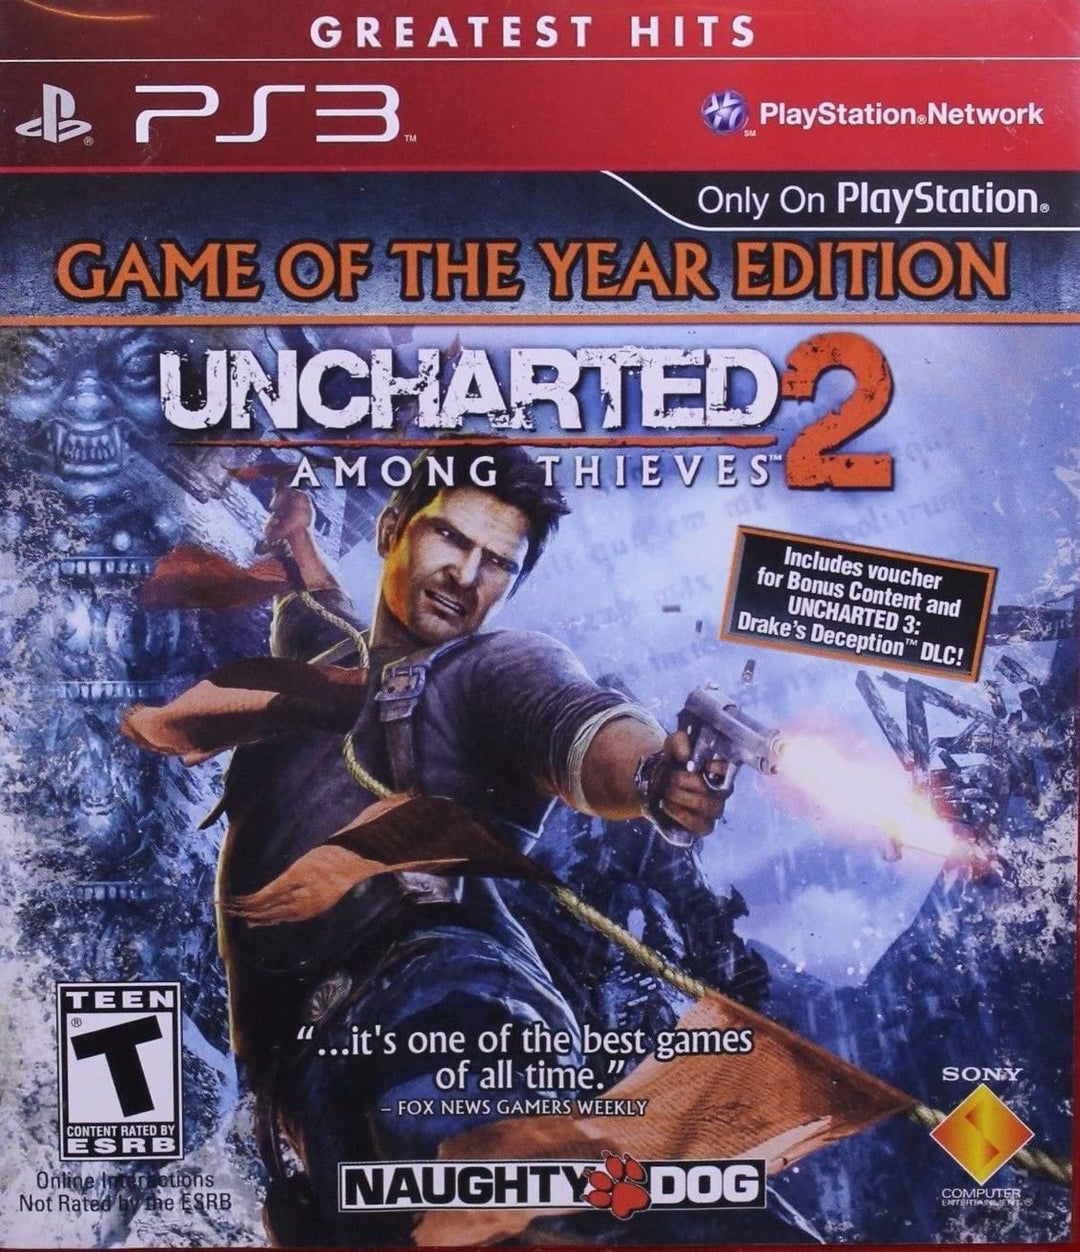 UNCHARTED 2: Among Thieves – Game of The Year Edition – Playstation 3[eine beliebte [günstige] Edition] [?????]